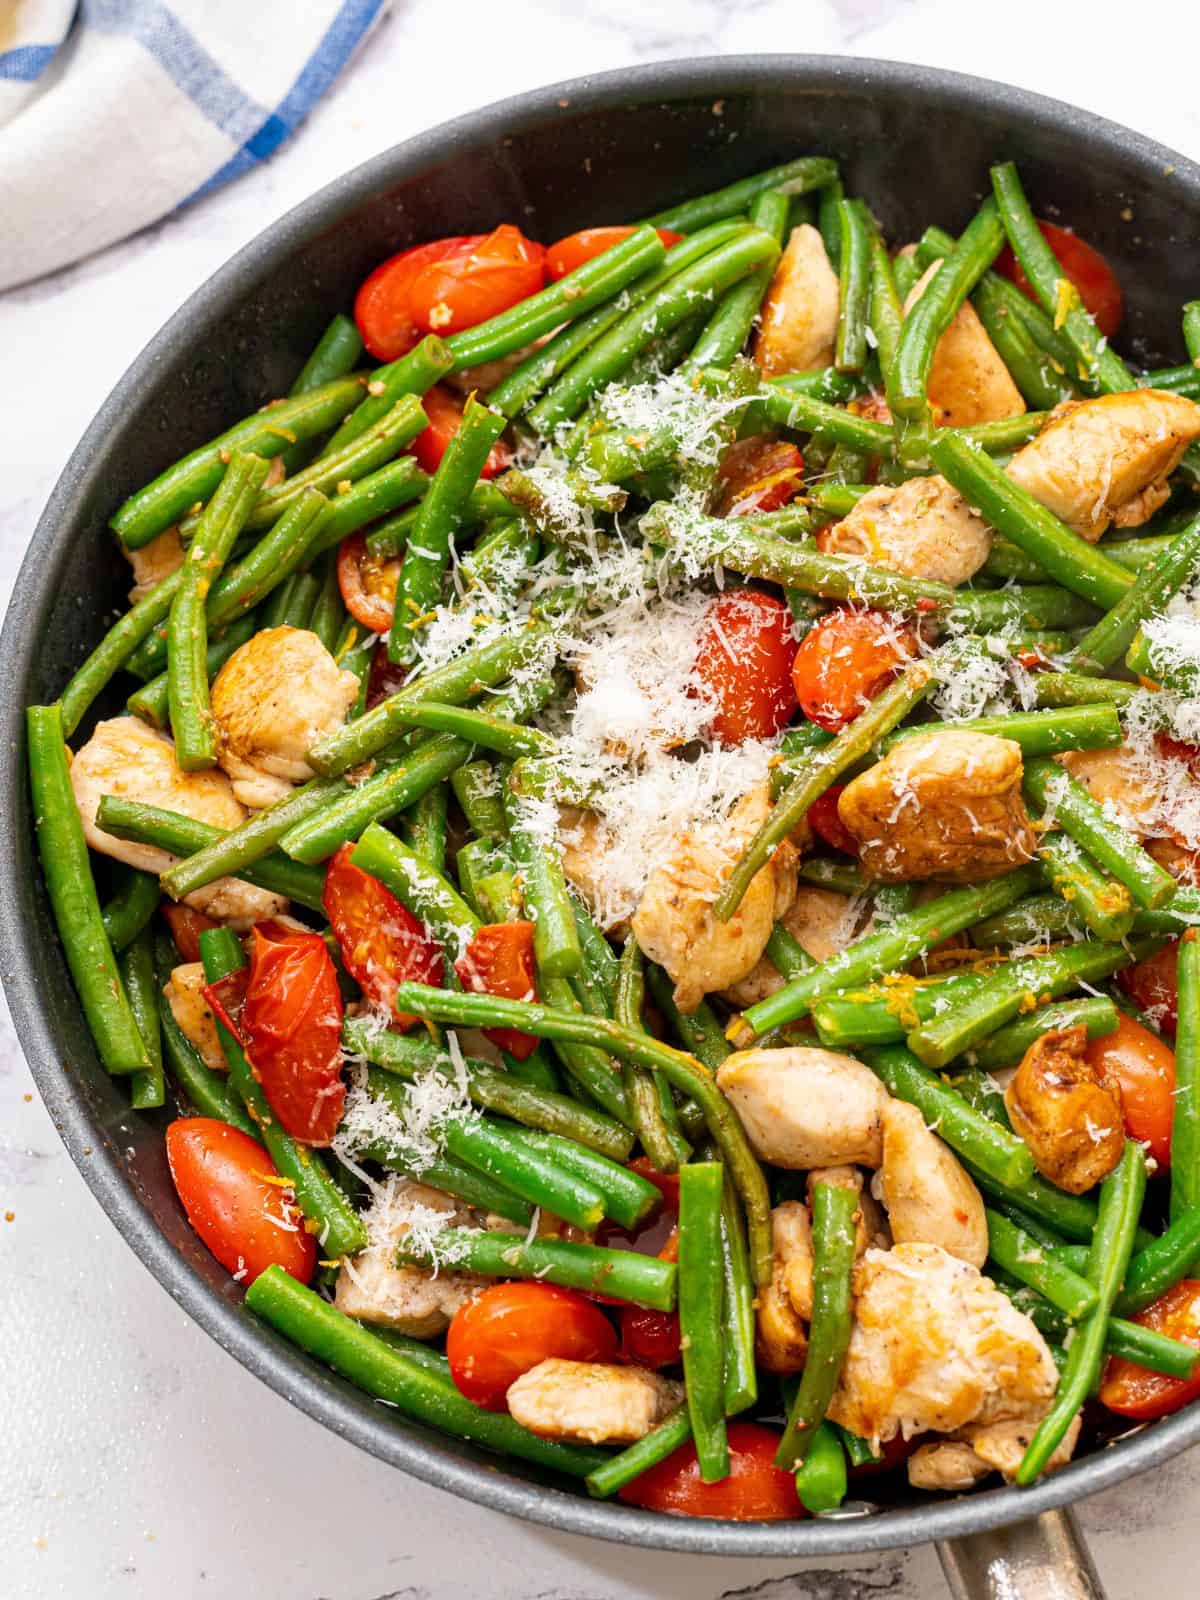 Large skillet with chunks of chicken, green beans, cherry tomatoes, and parmesan.